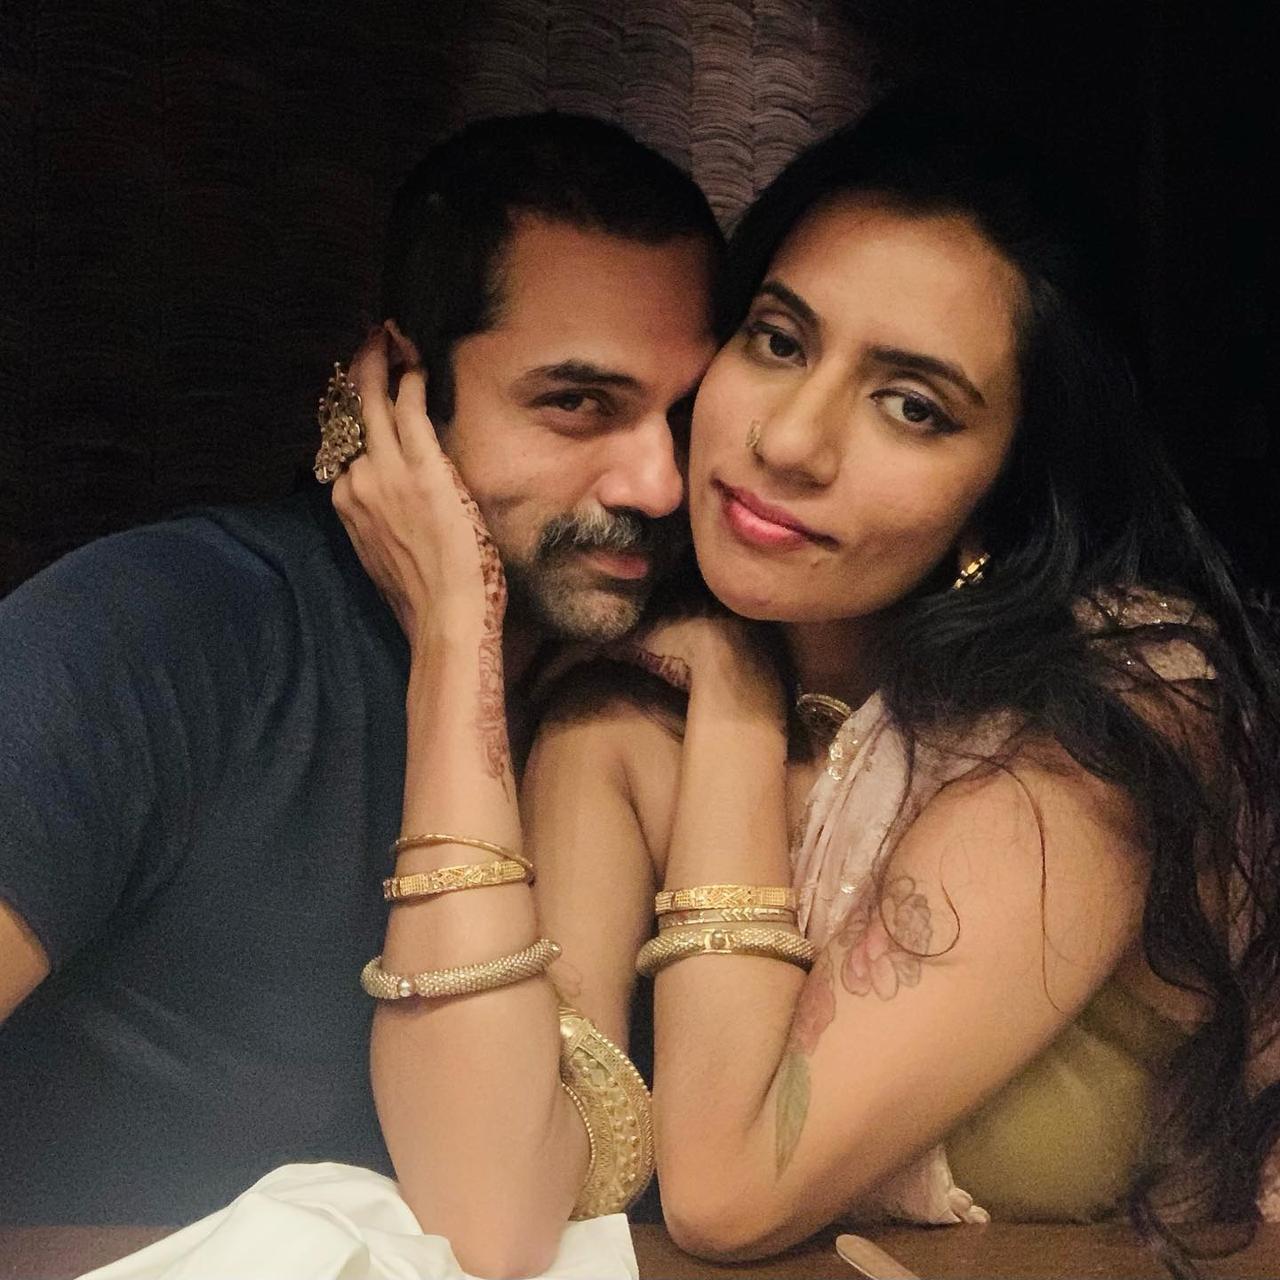 But a few years later, Abhay Deol and Preeti Desai called off their relationship and parted ways. Abhay dated Shilo Shiv Suleman, and the duo made their relationship Instagram official in 2021.